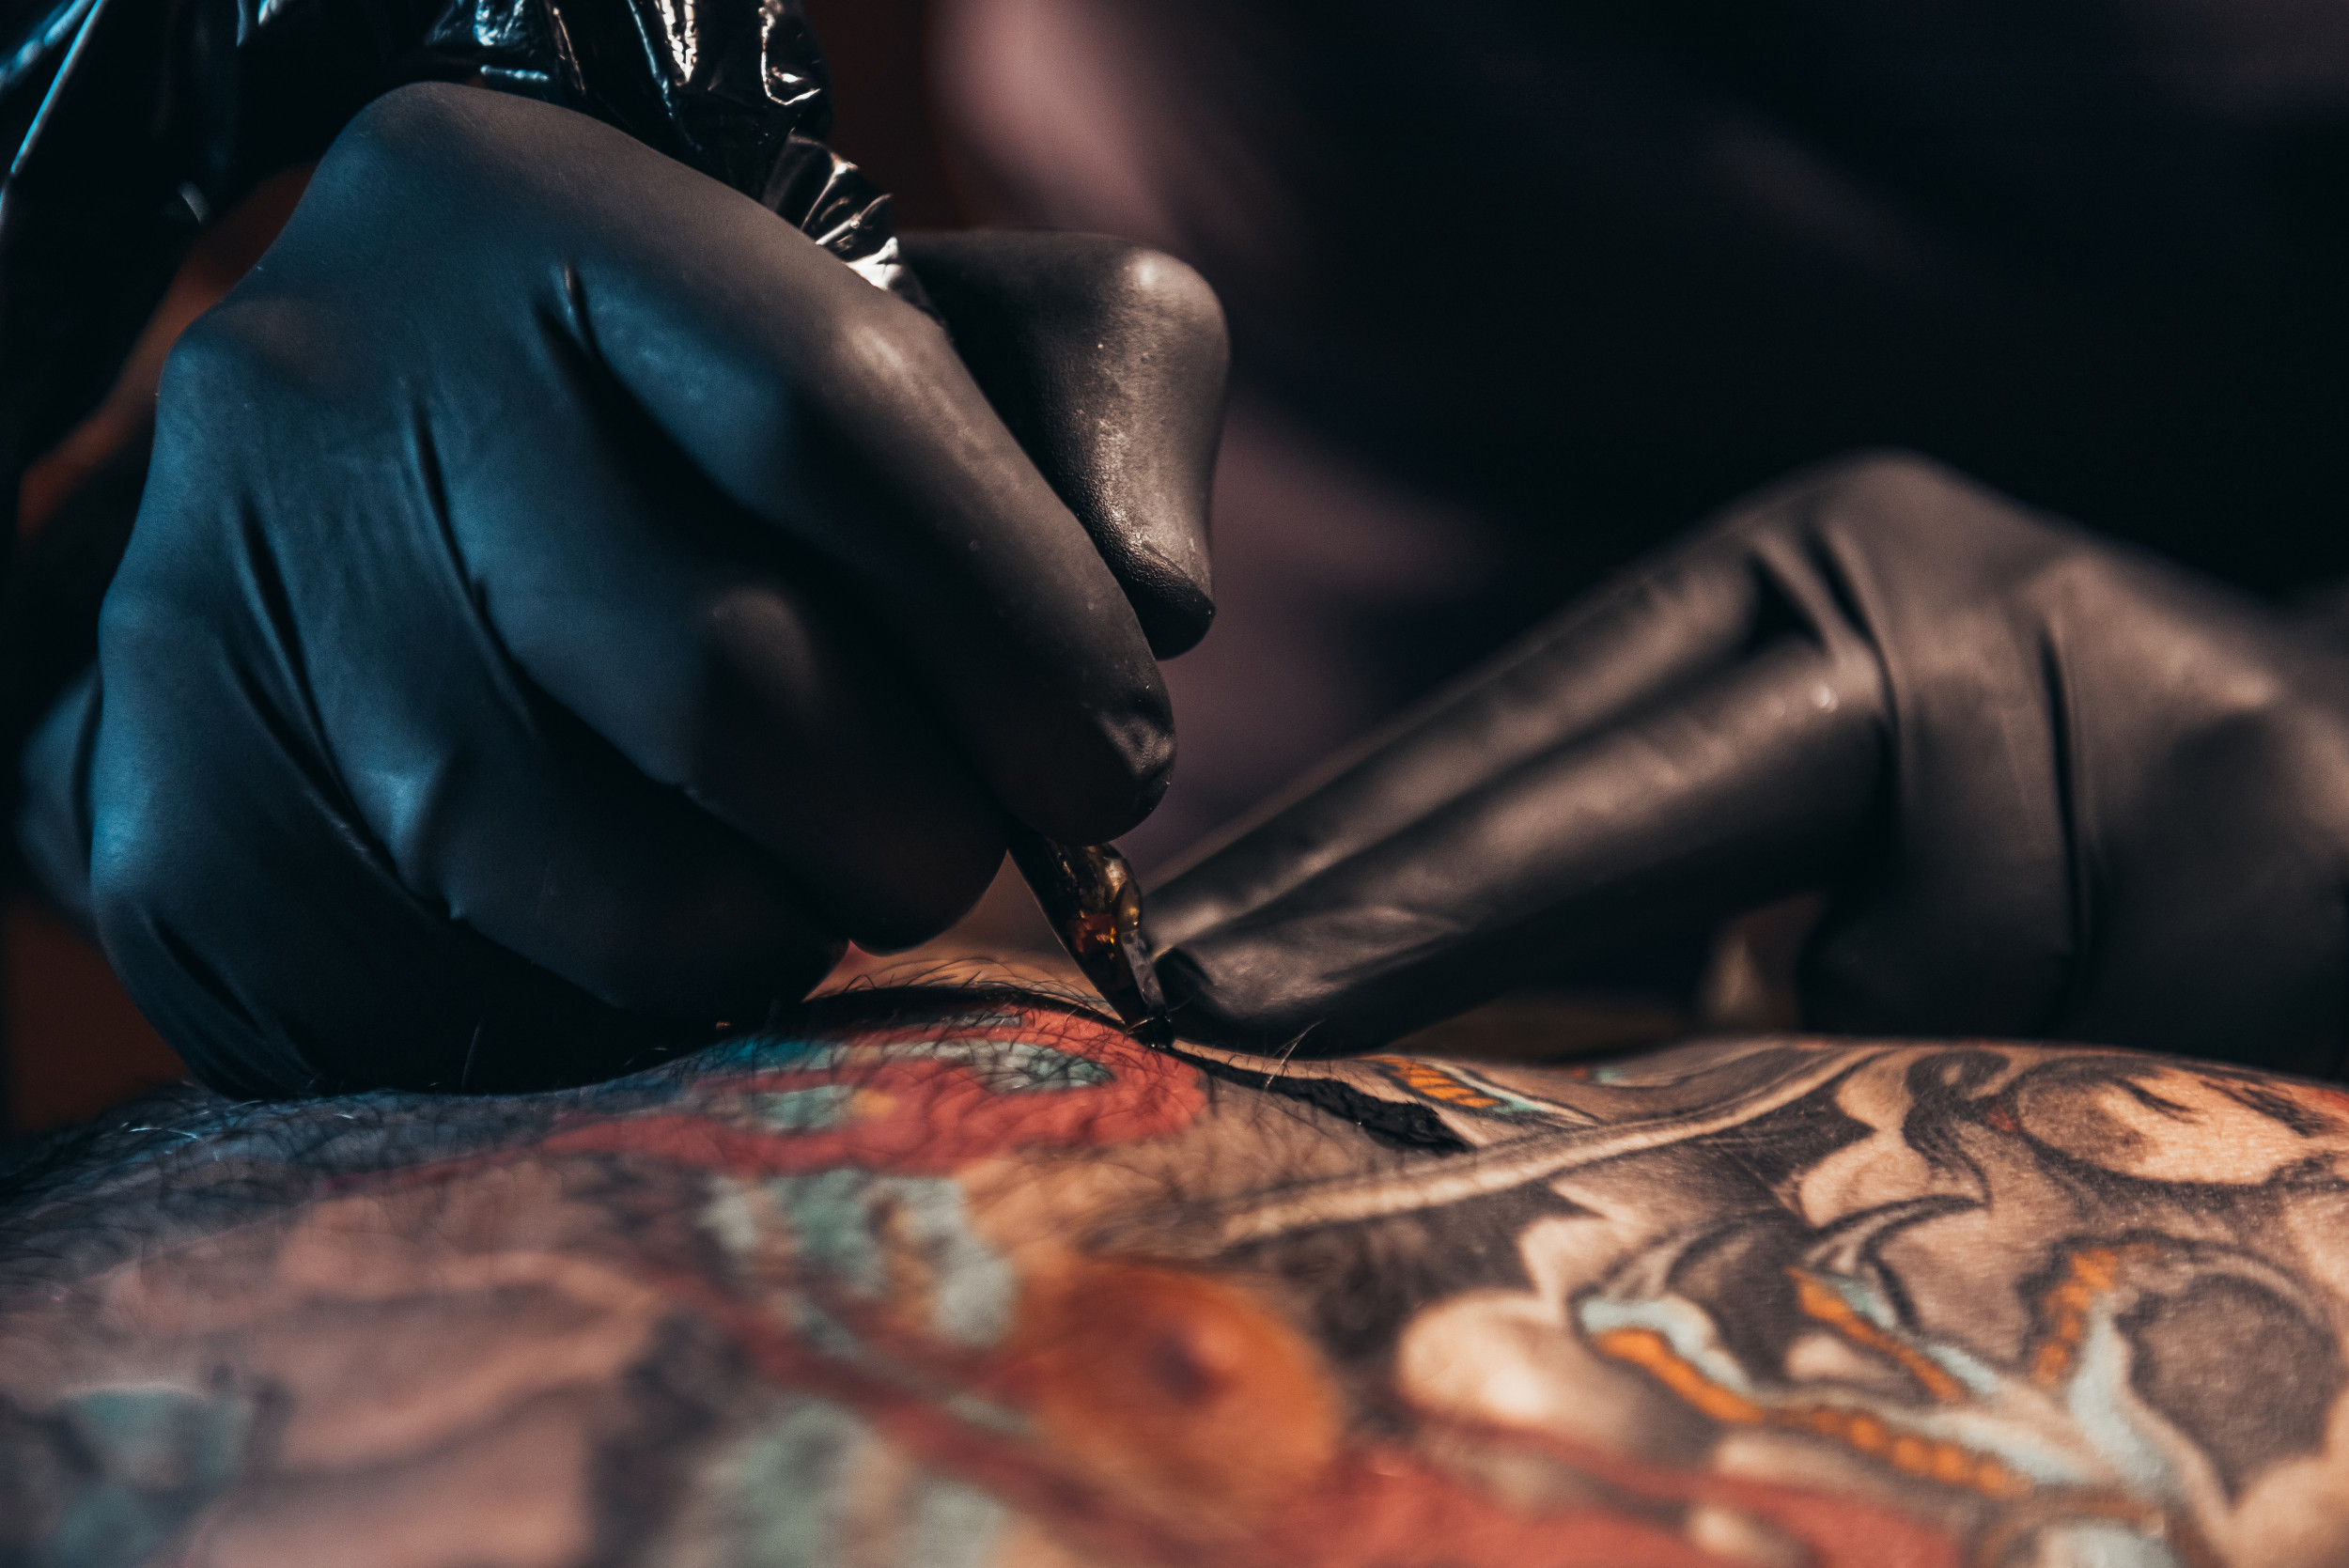 I Left My Job to Be a Tattoo Artist — Things That Surprised Me Most